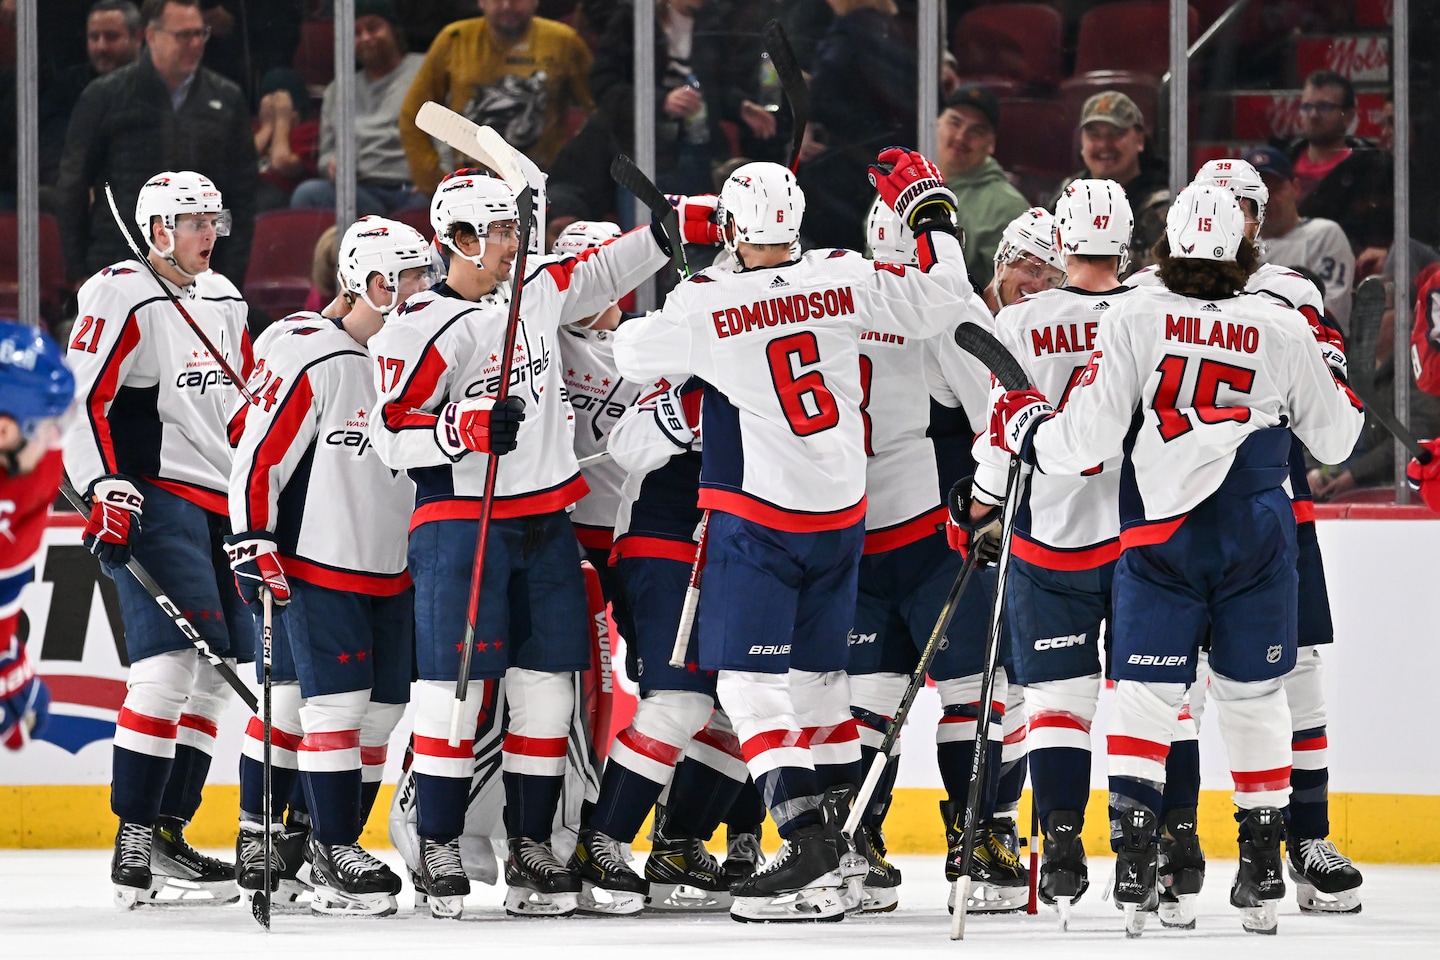 Capitals ‘scratch and claw’ for a 4-3 victory in Montreal